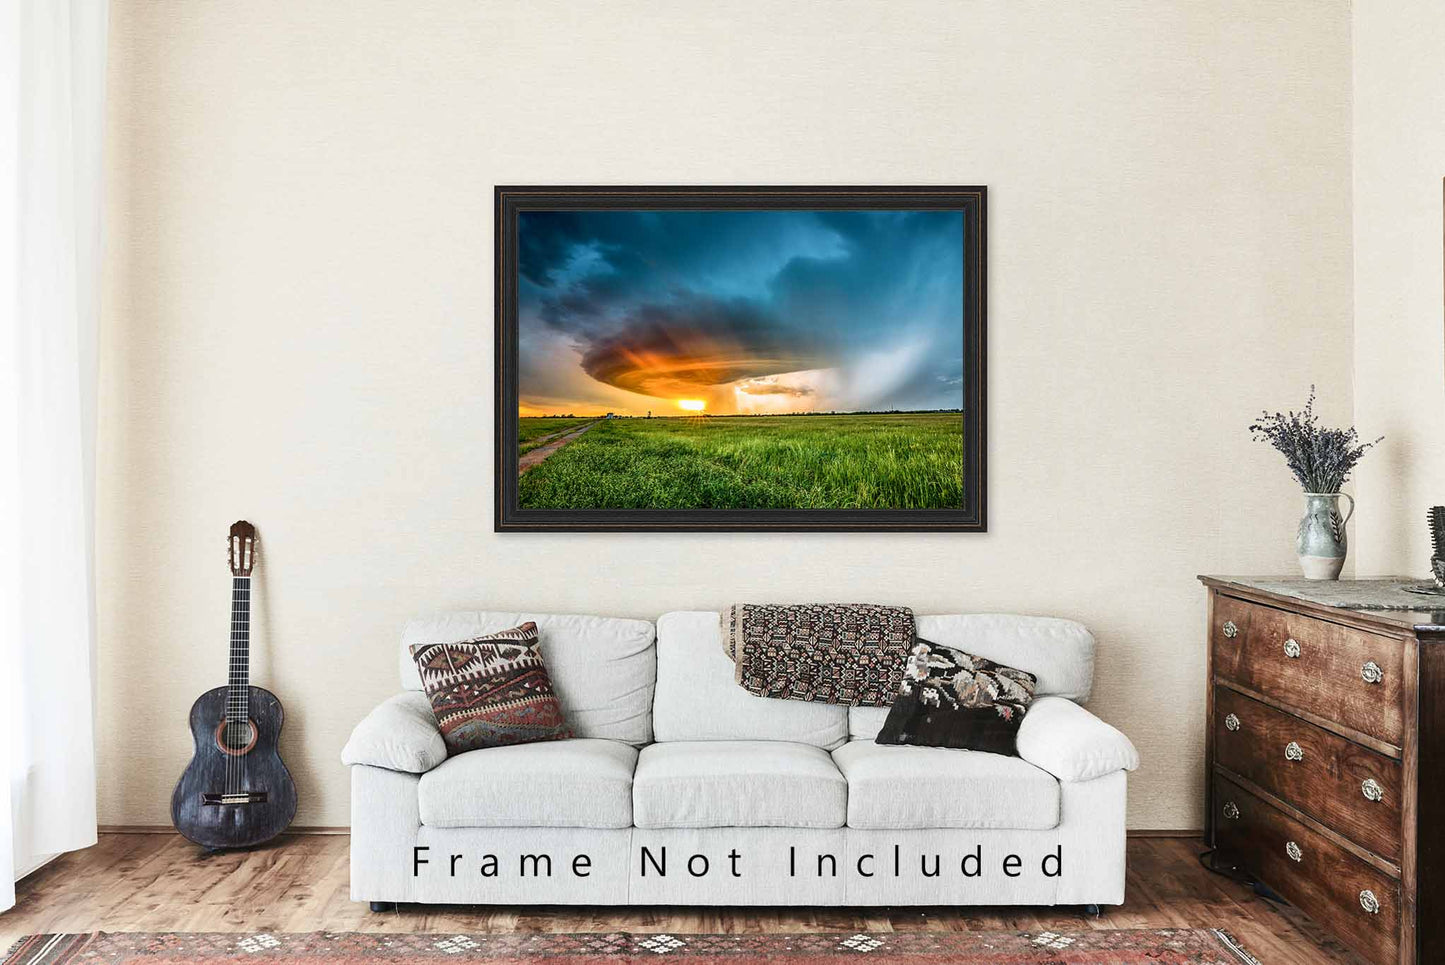 Storm Photography Print (Not Framed) Picture of Supercell Thunderstorm Illuminated by Sunlight at Sunset in Oklahoma Weather Wall Art Nature Decor